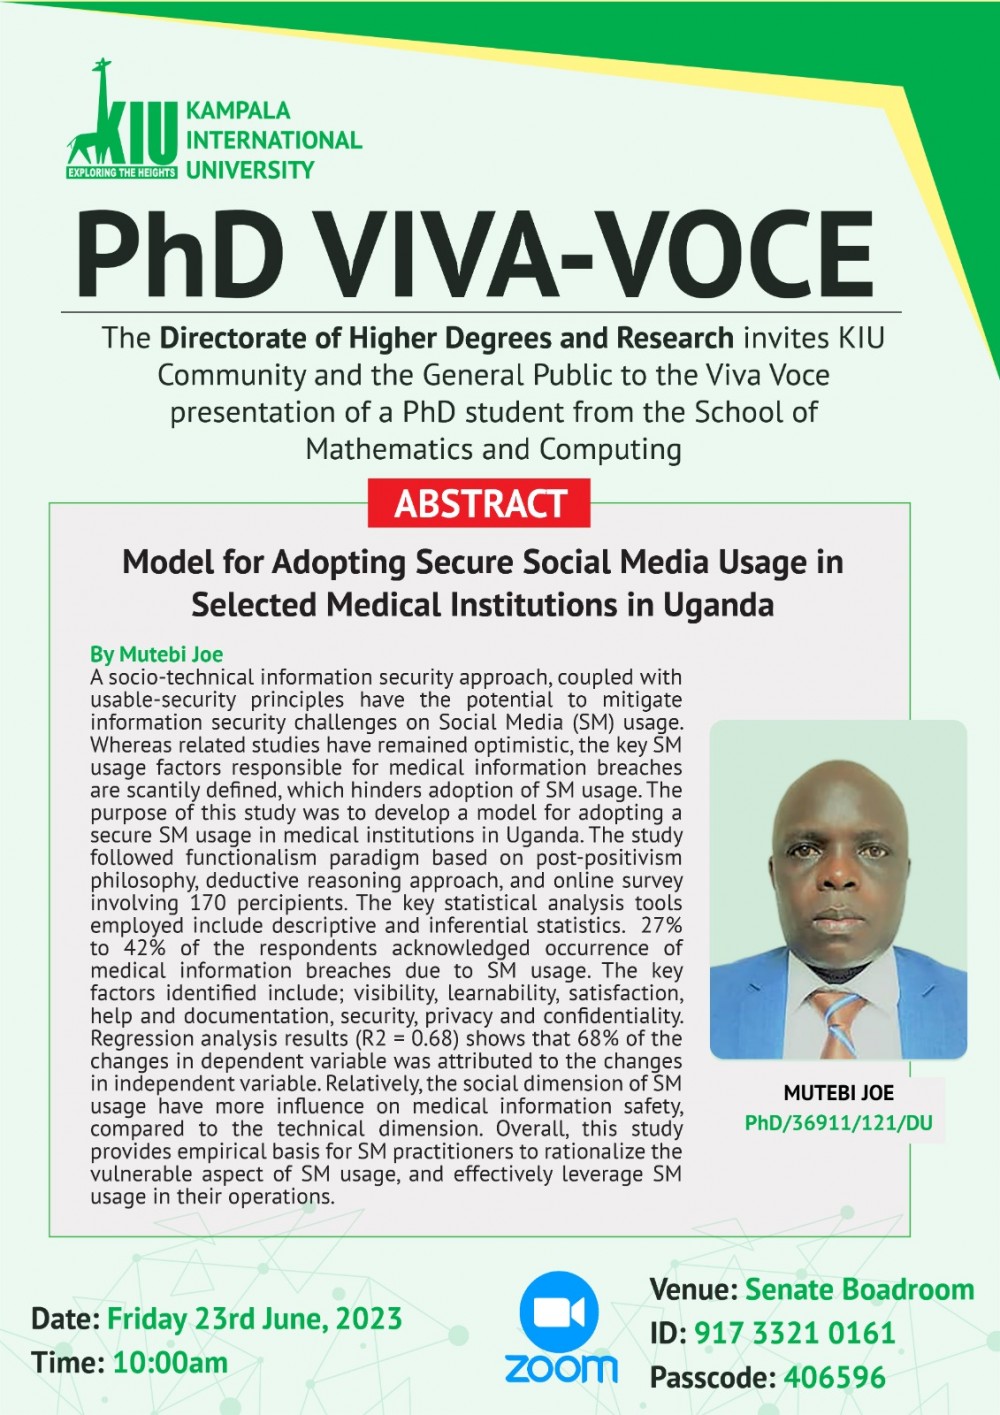 Directorate Of Higher Degrees And Research To Hold Phd Viva Voce On June 23rd, 2023